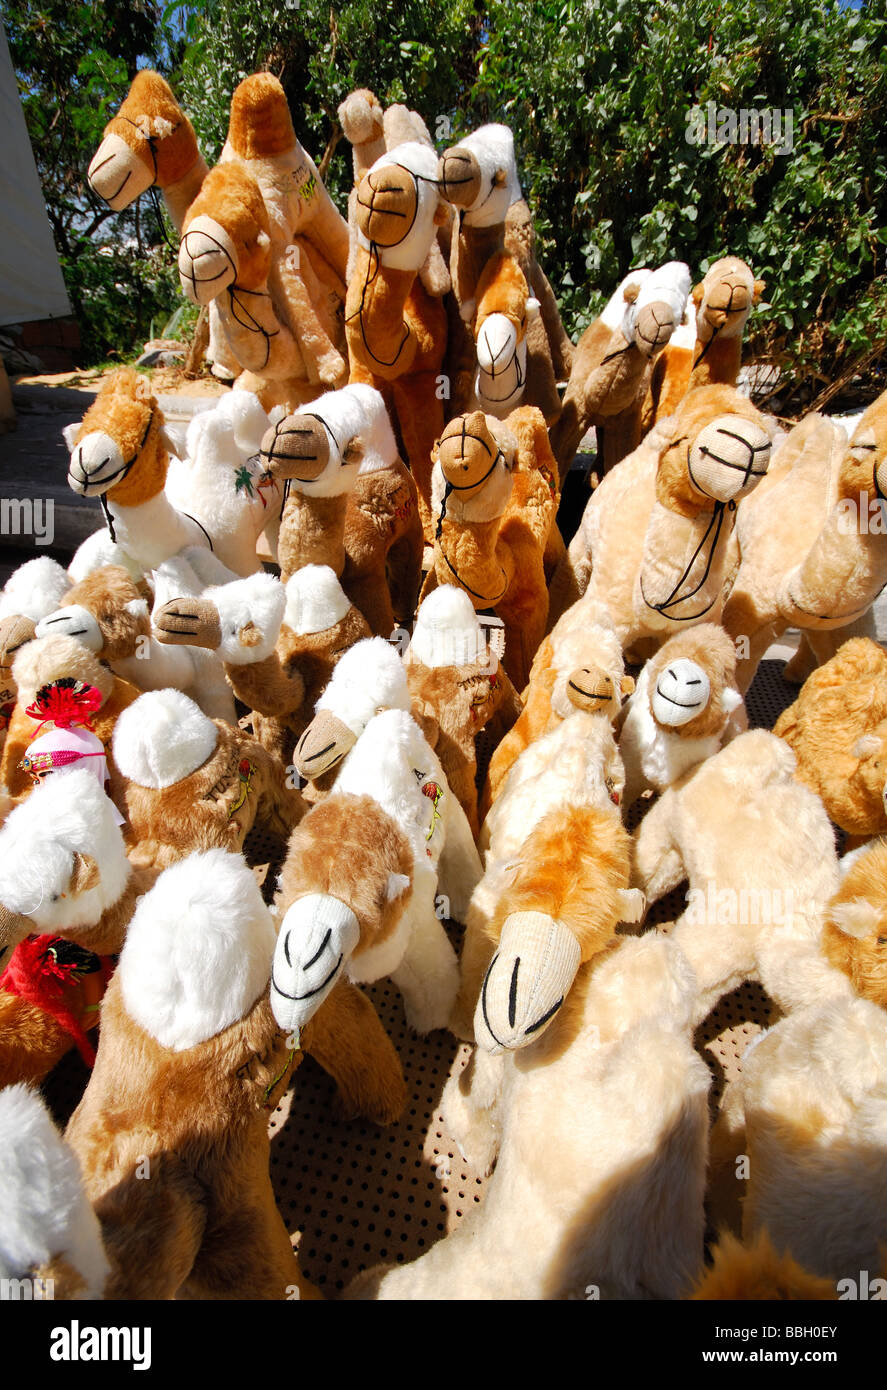 TUNIS, TUNISIA. Toy camels at a market in Sidi bou Said outside Tunis. 2009. Stock Photo